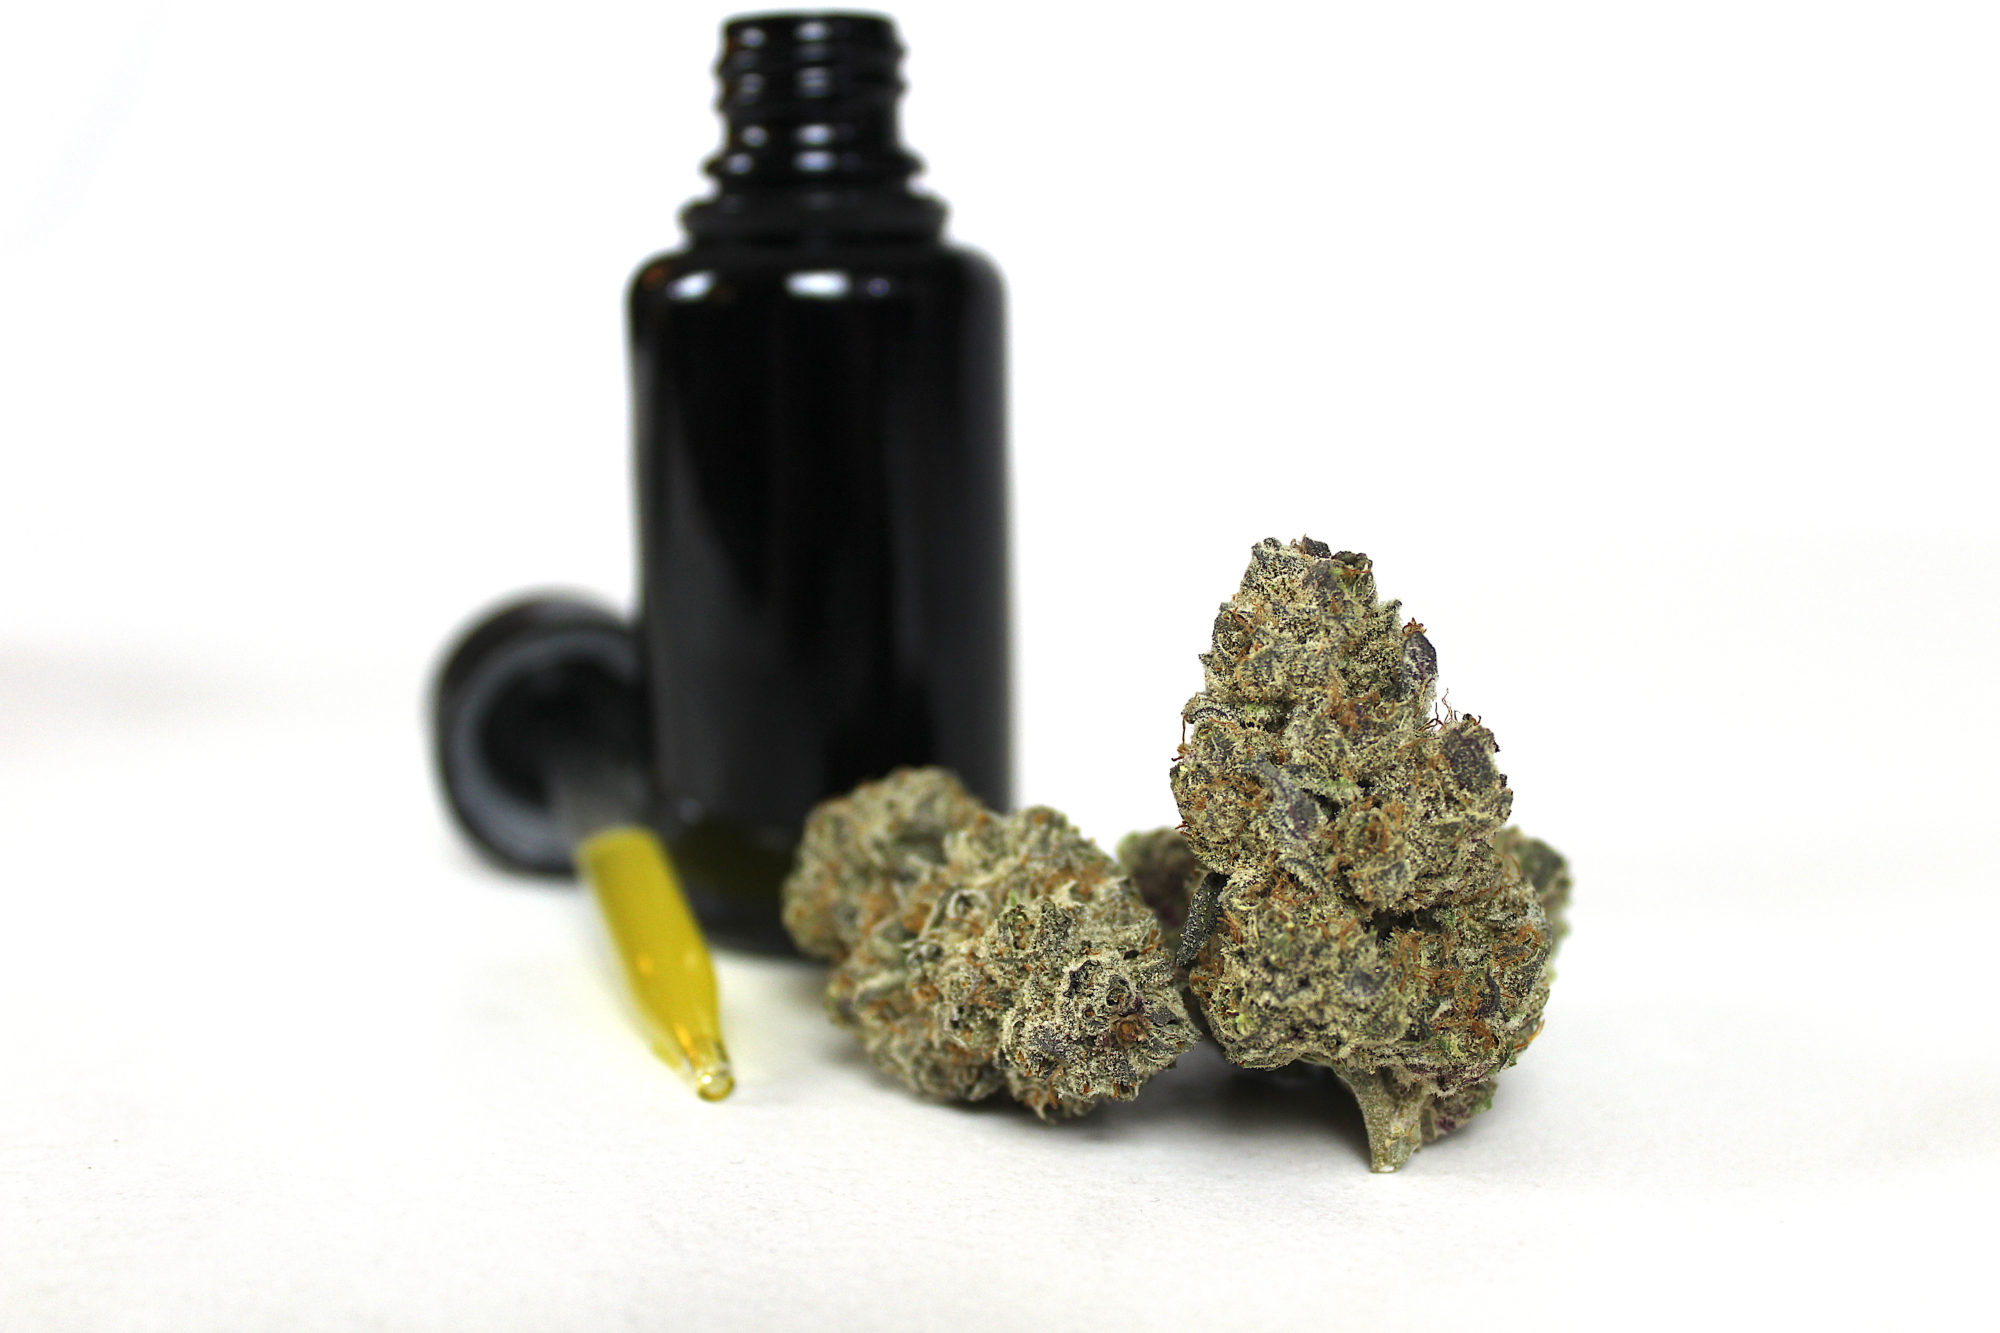 Cannabis Tincture made from cannabis flower